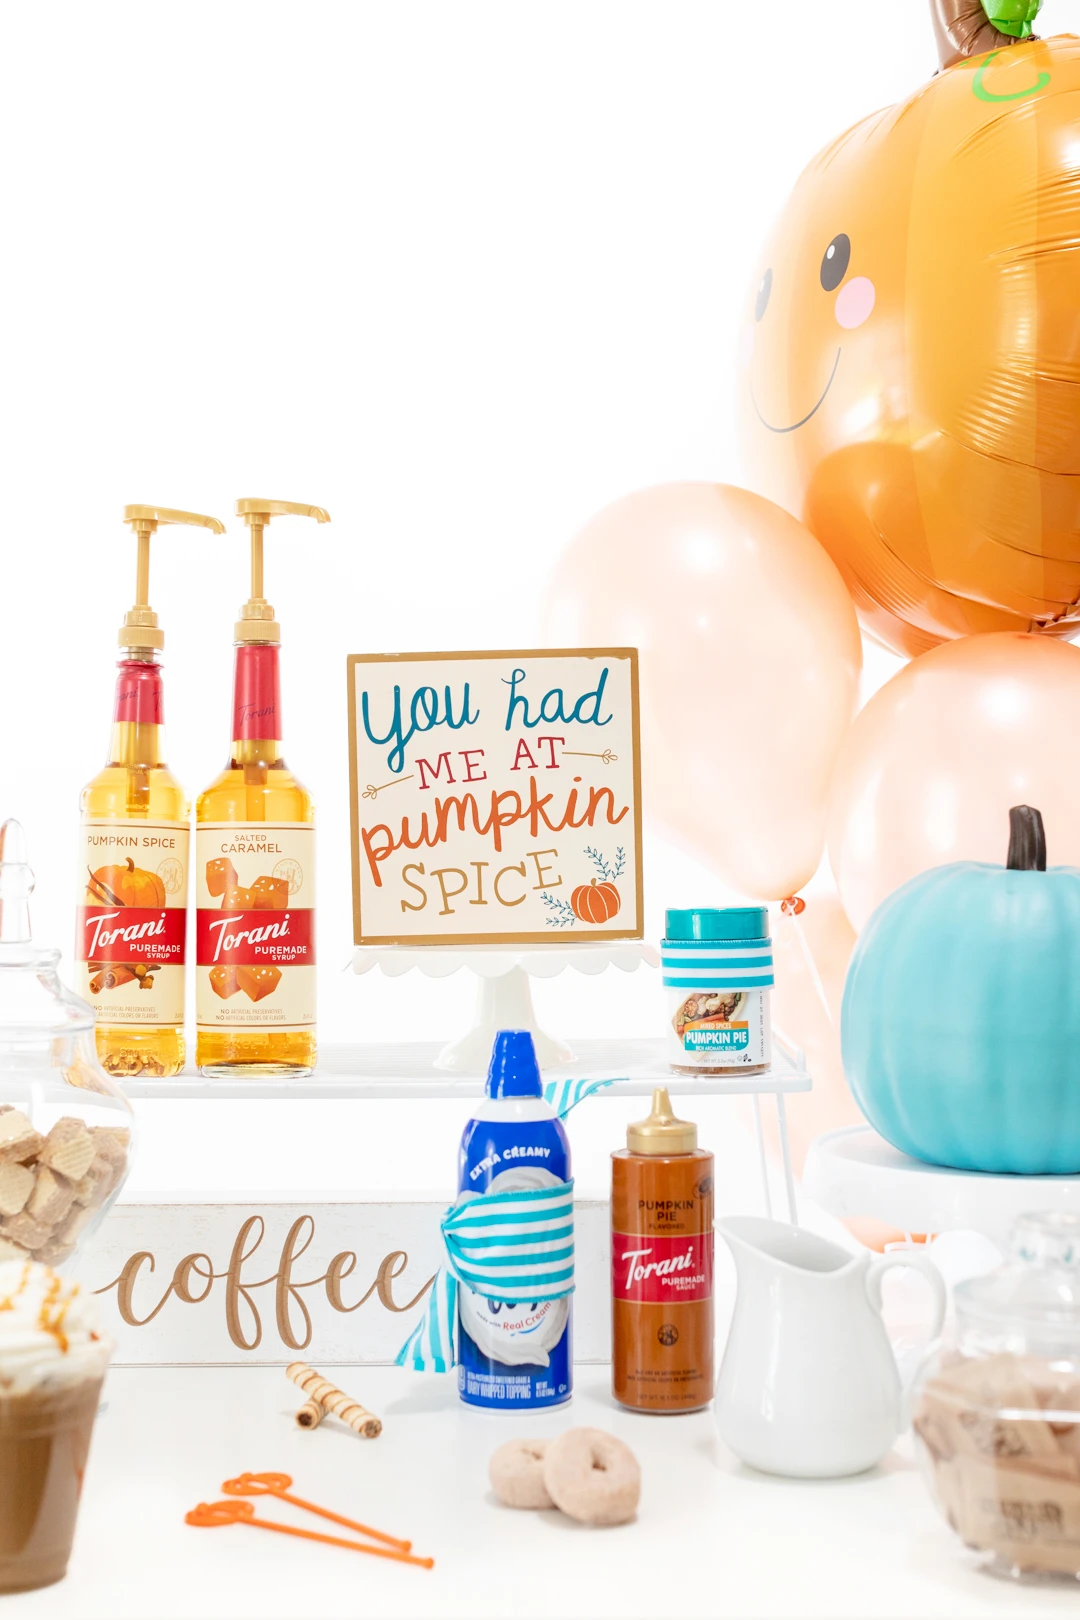 pretty iced coffee bar with syrups, signs, whipped cream, sauces and balloons to decorate.